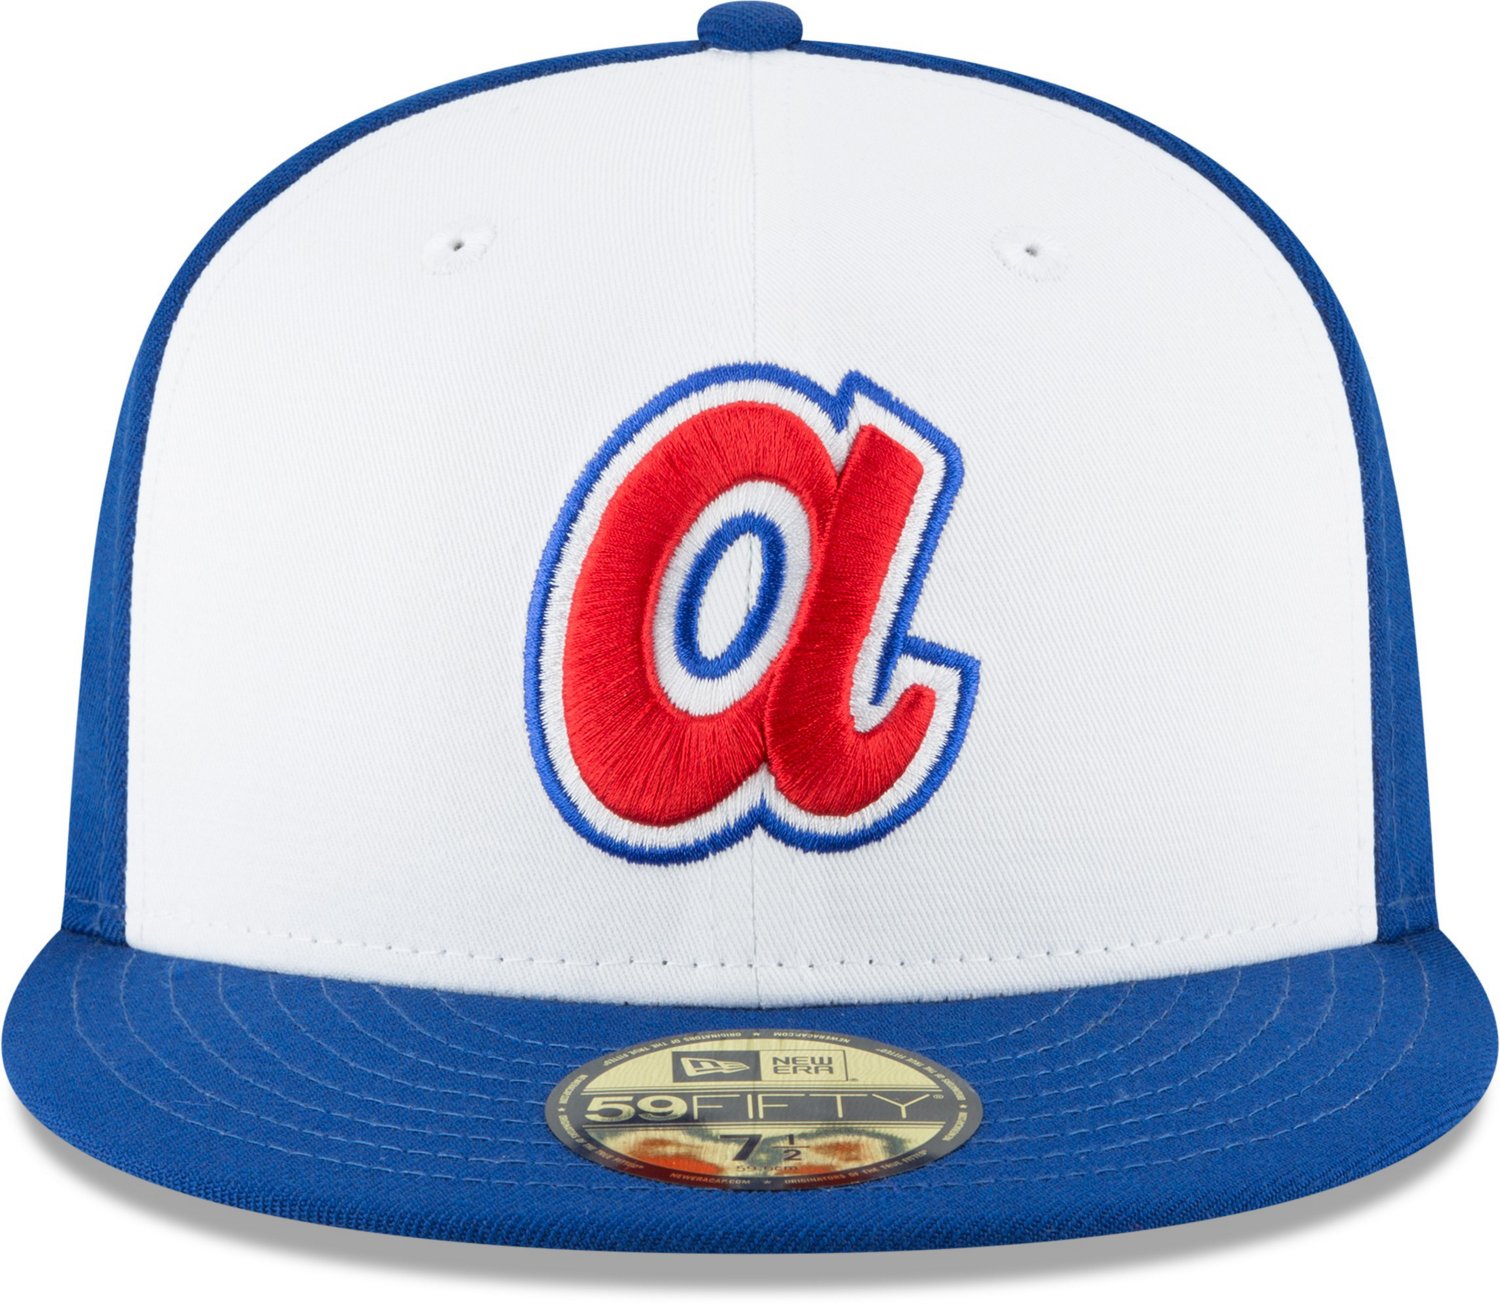 New Era Men's Atlanta Braves 1972 Cooperstown 59FIFTY Fitted Cap